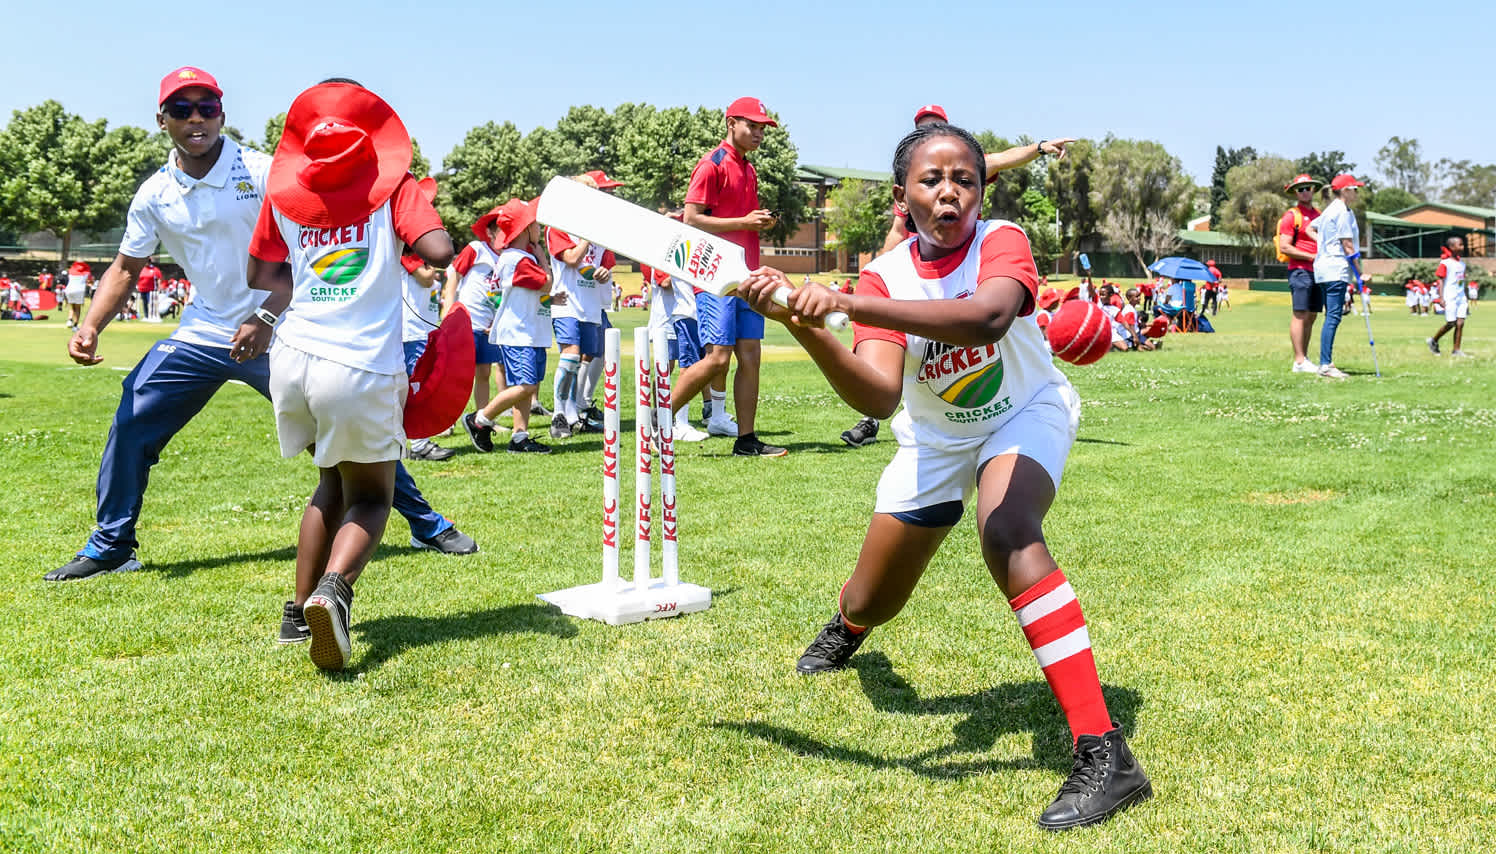 Kagiso Rapulana of the Lions working with children from Qhoweng Primary School during the KFC Mini-Cricket Provincial Festival at Queens High School